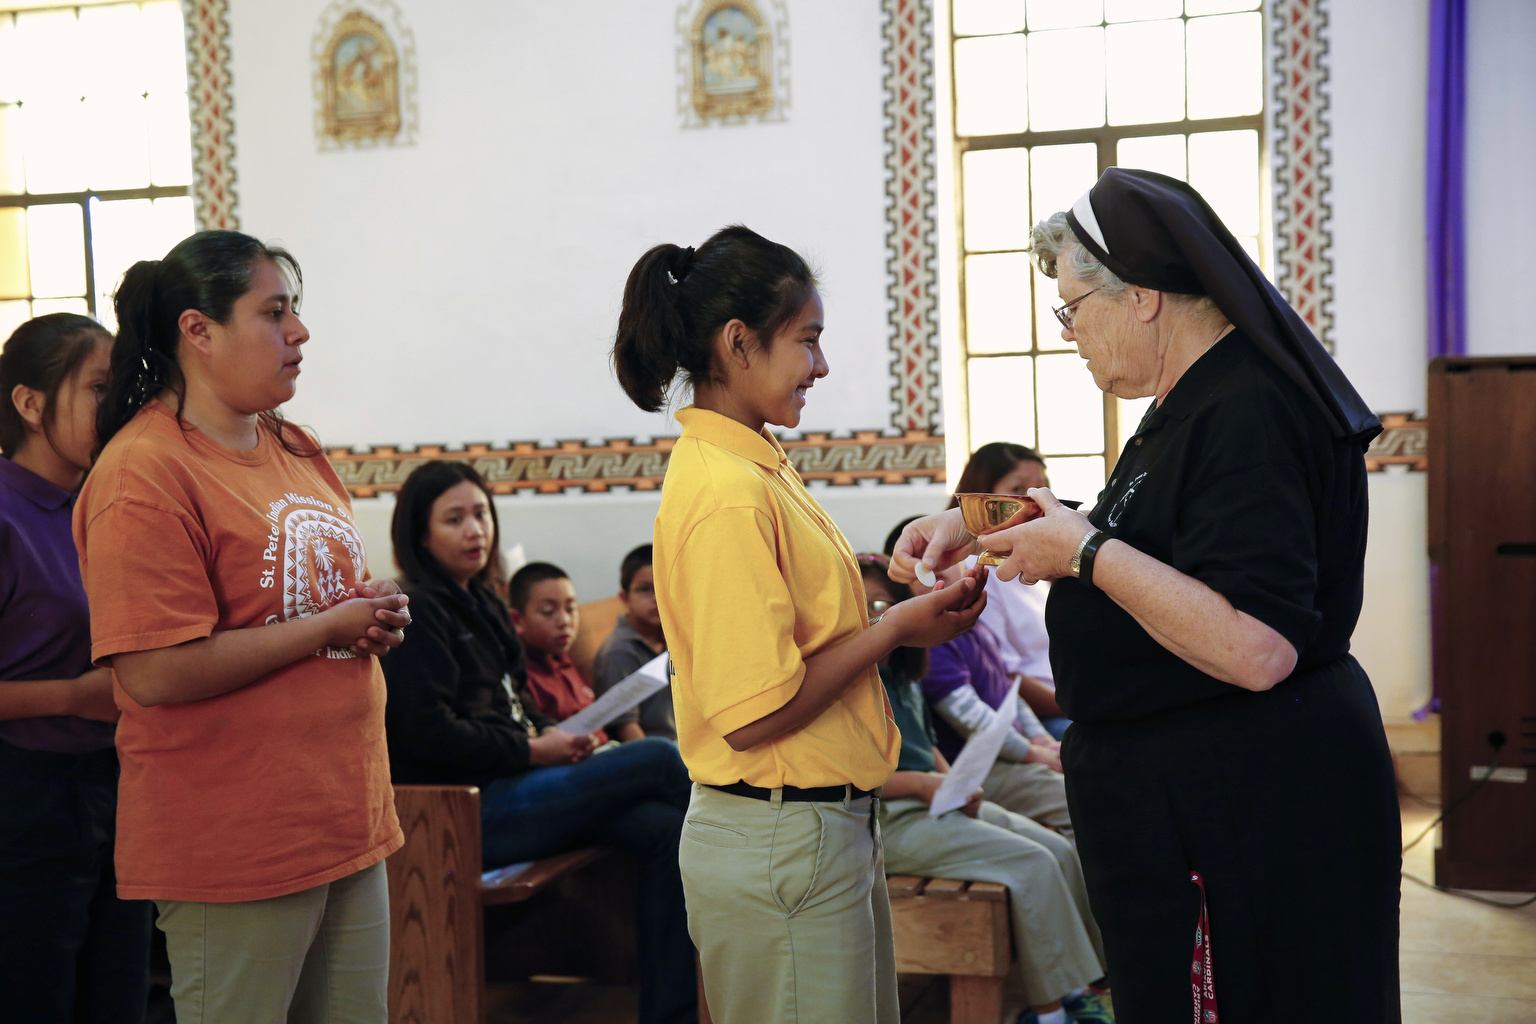 Sr. Carol Mathe distributes Communion during a weekday Mass at St. Peter Indian Mission School in Bapchule, Ariz. The mission church is the center of the school's campus and at the heart of the ministry of the Franciscan Sisters of Christian Charity. (CNS photo/Nancy Wiechec)